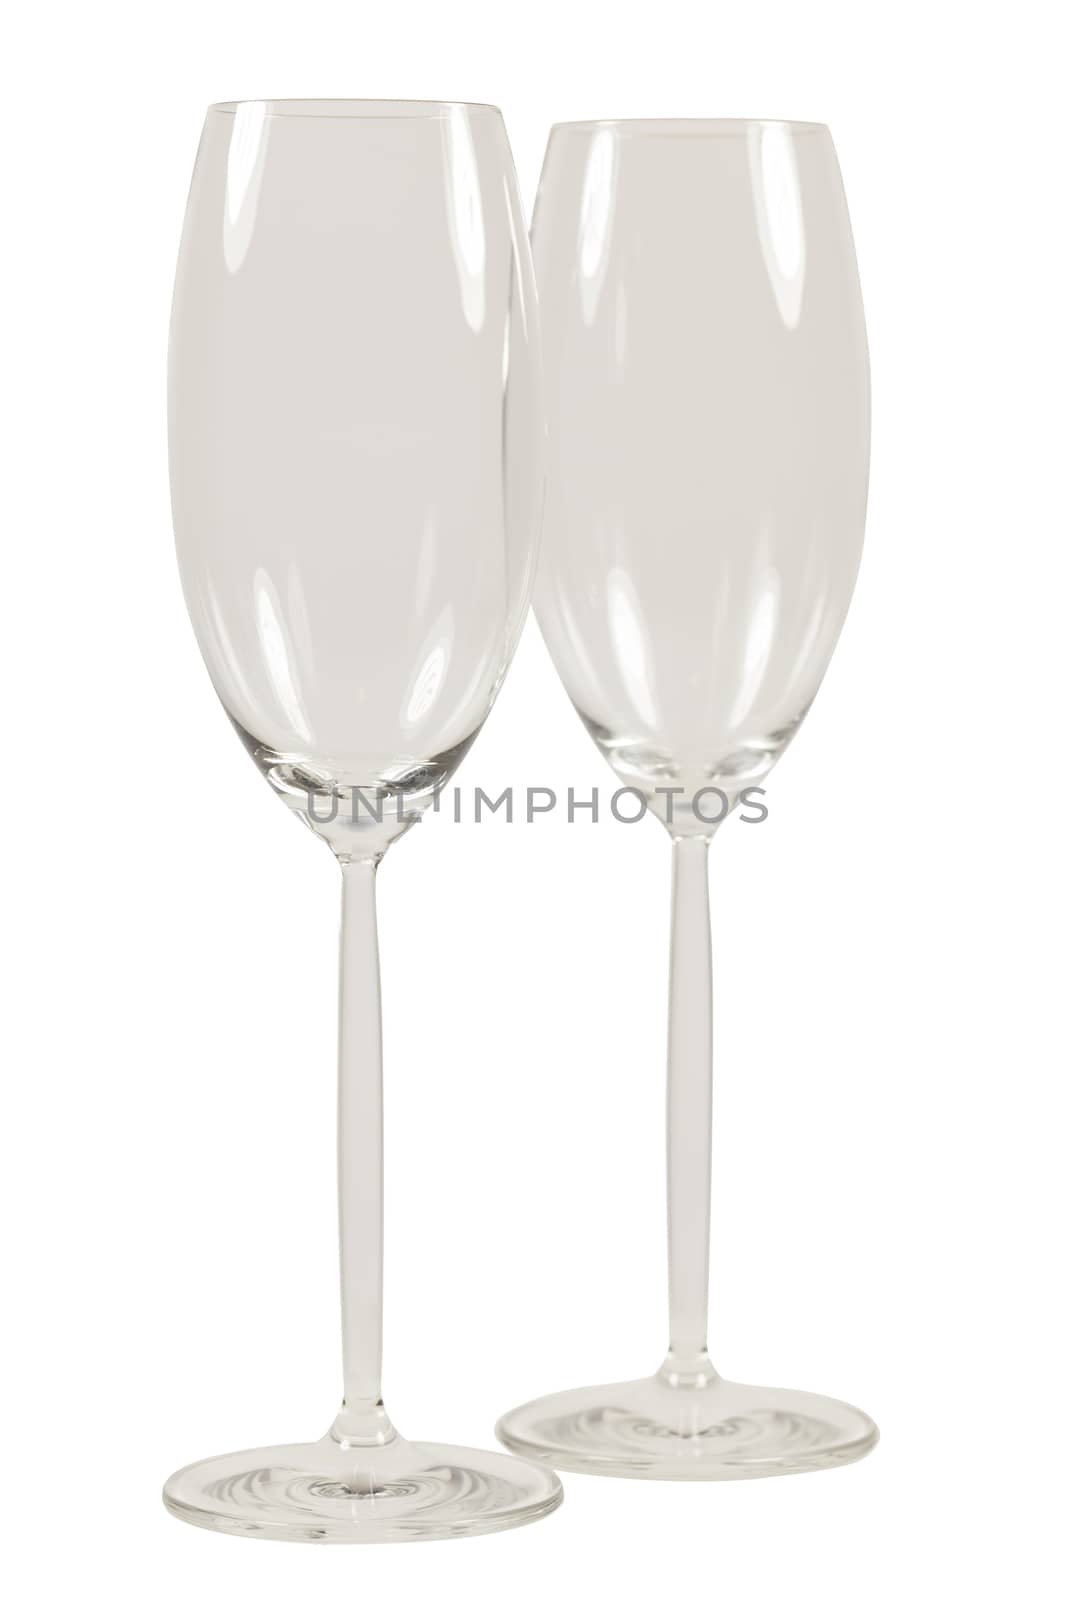 Two empty champagner glasses isolated on White background